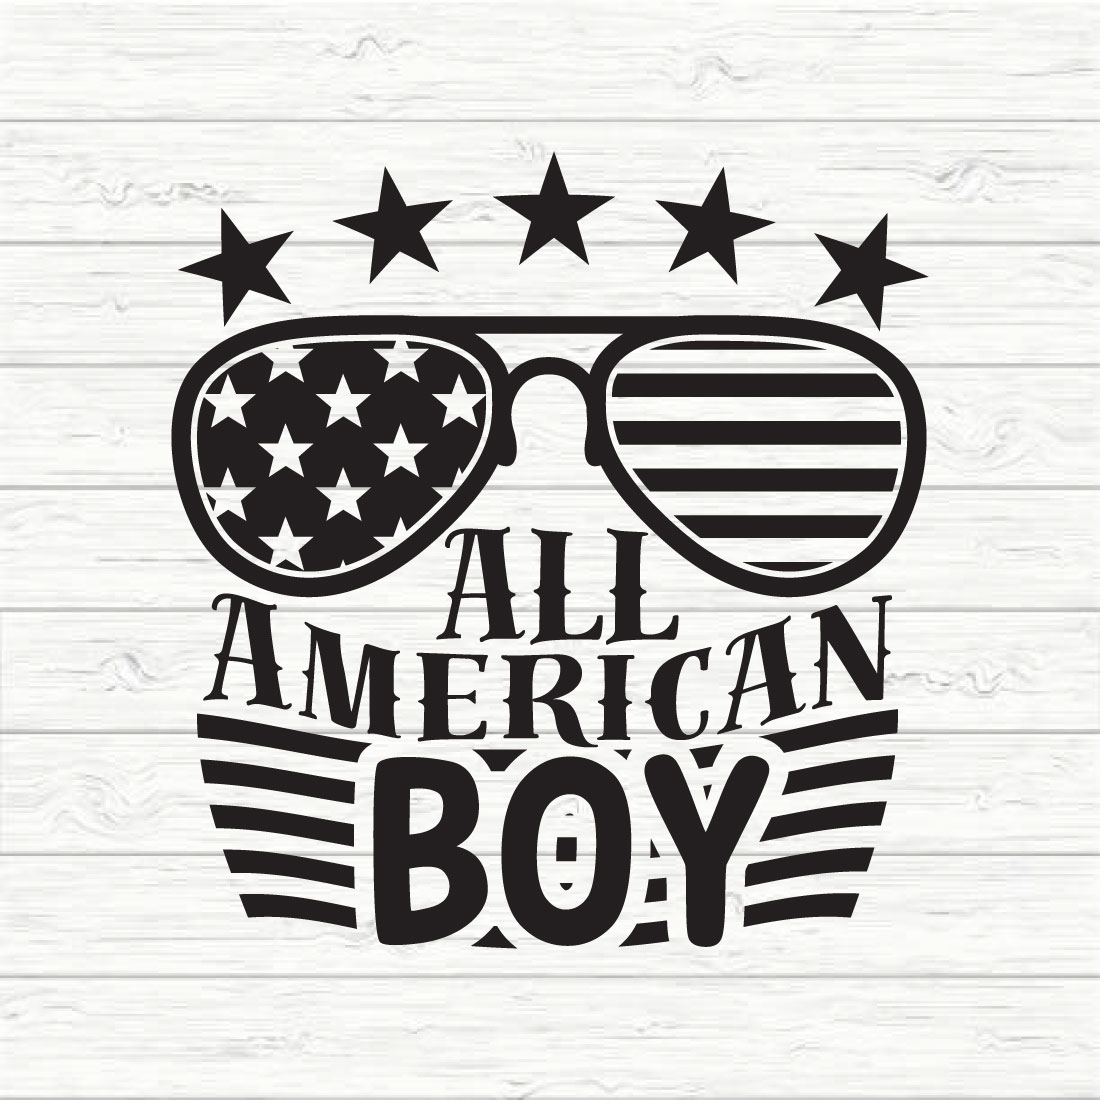 All American Boy preview image.